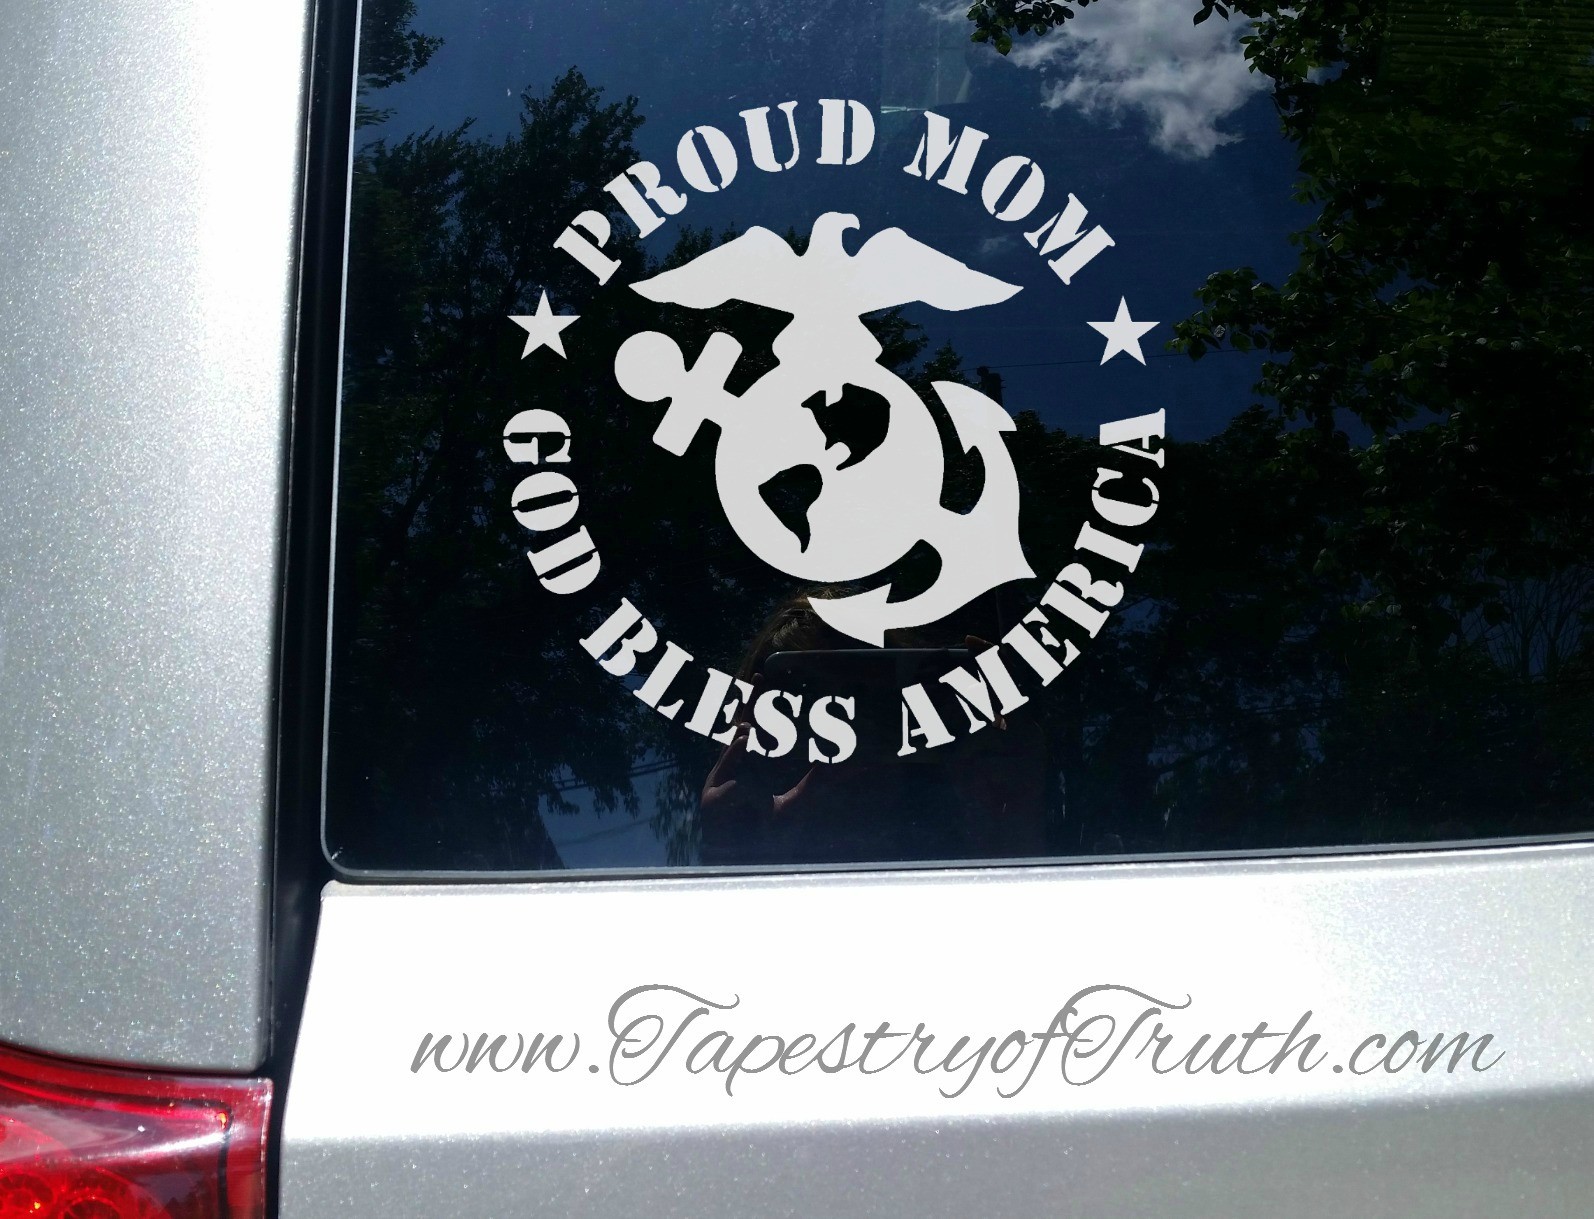 Proud Mom (of a Marine) - God Bless America - Car Decal